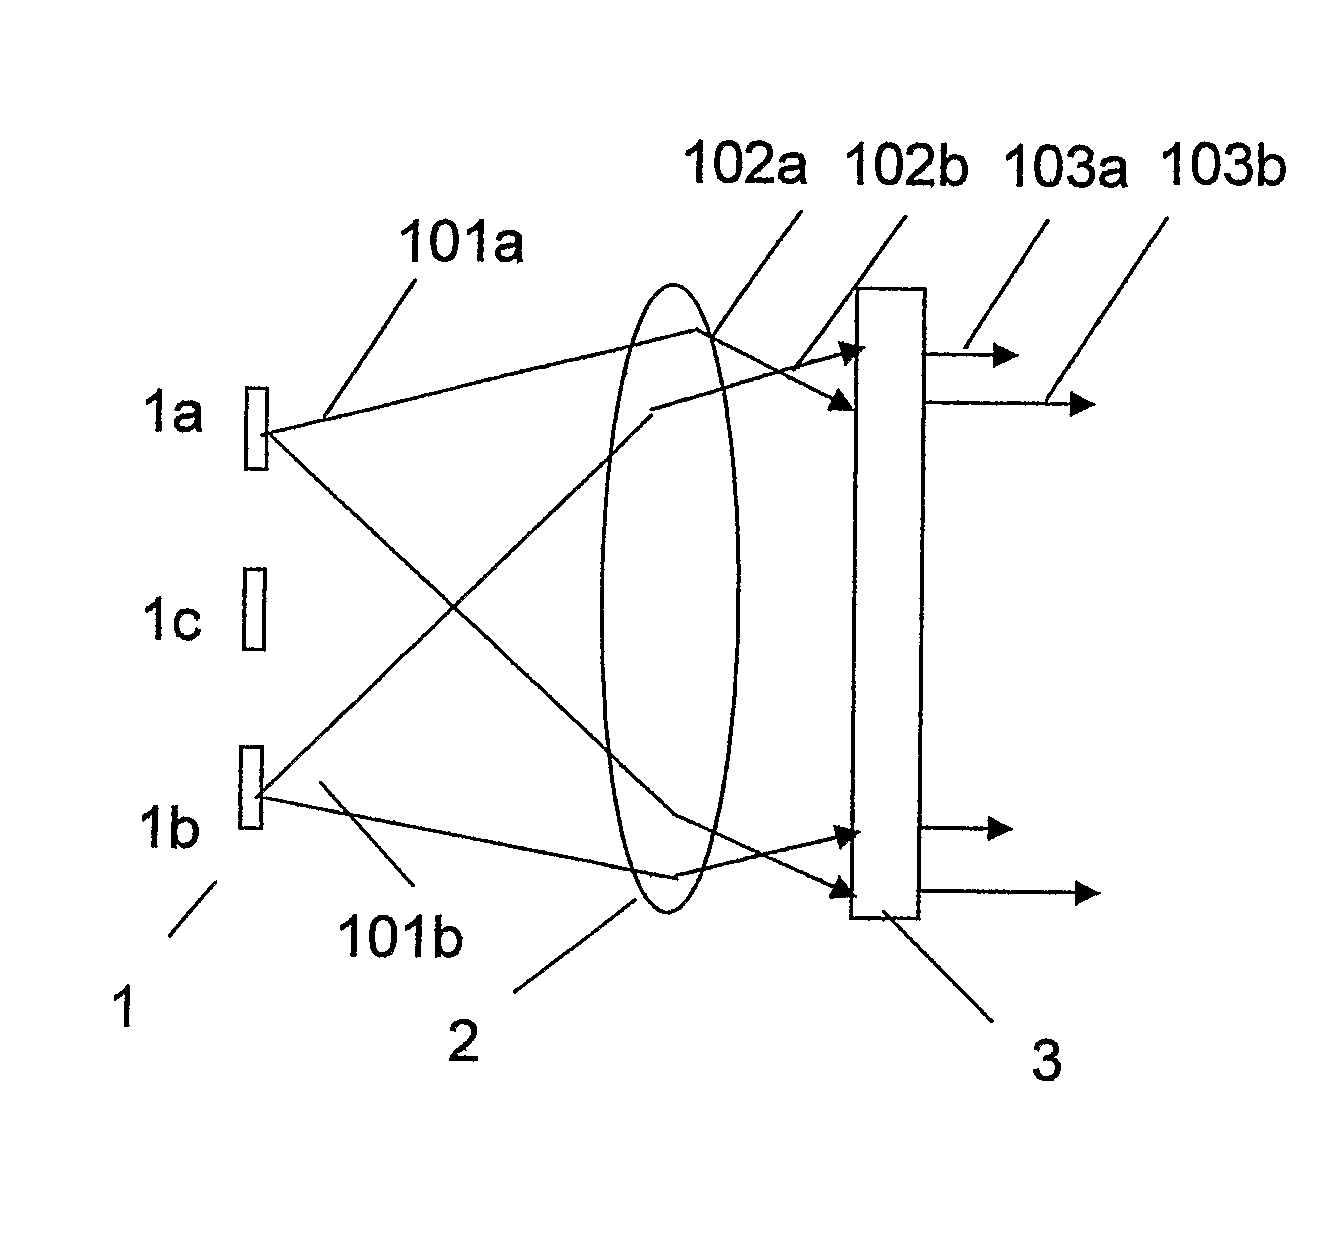 Apparatus for condensing light from multiple sources using Bragg gratings